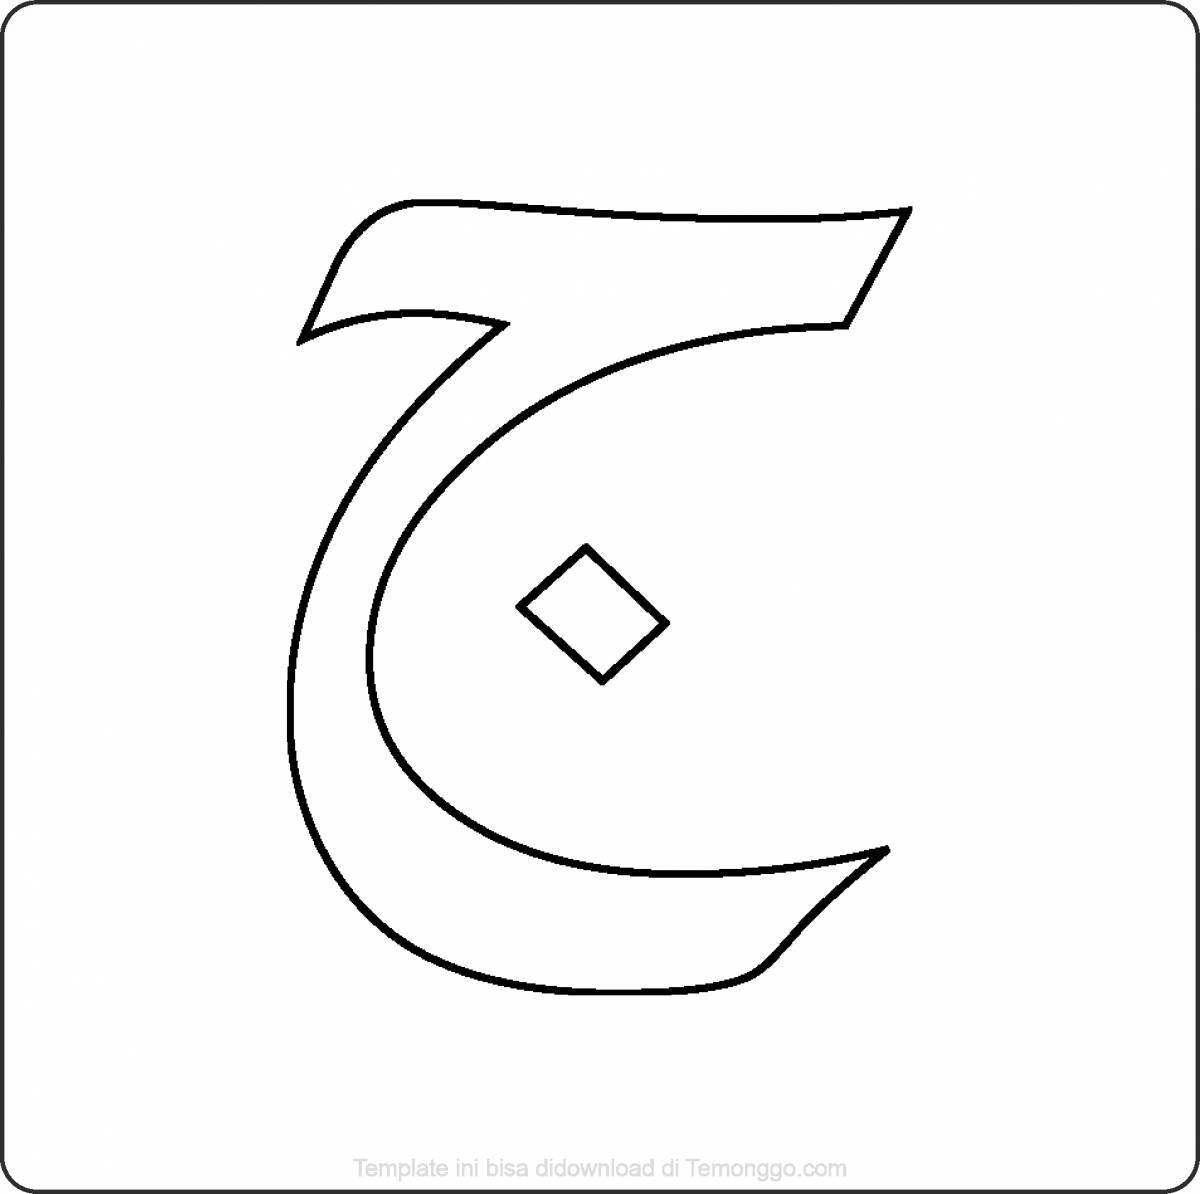 A fun coloring book with Arabic letters